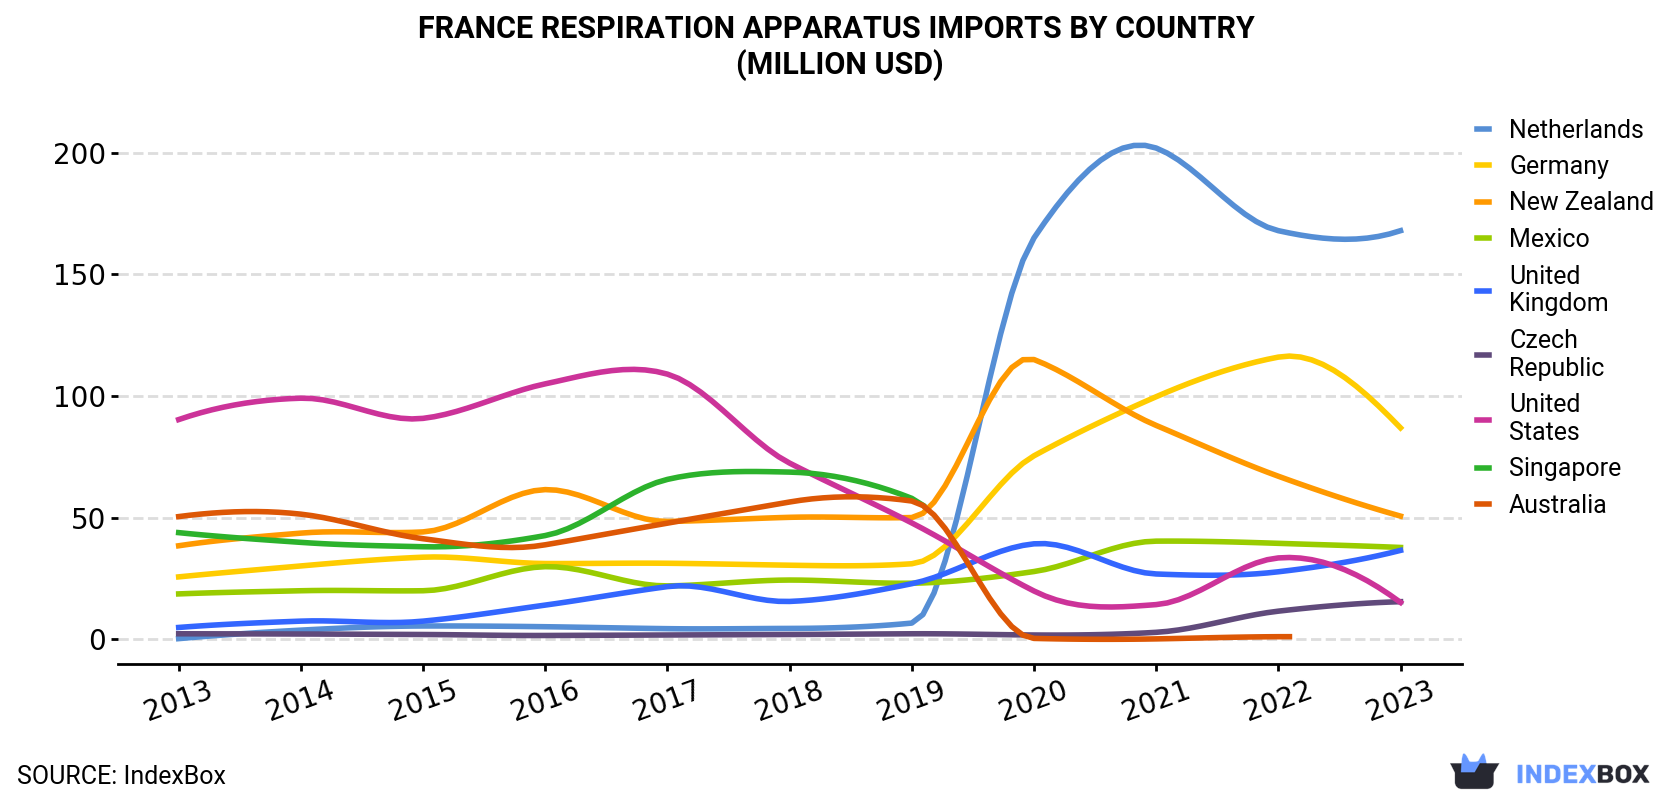 France Respiration Apparatus Imports By Country (Million USD)